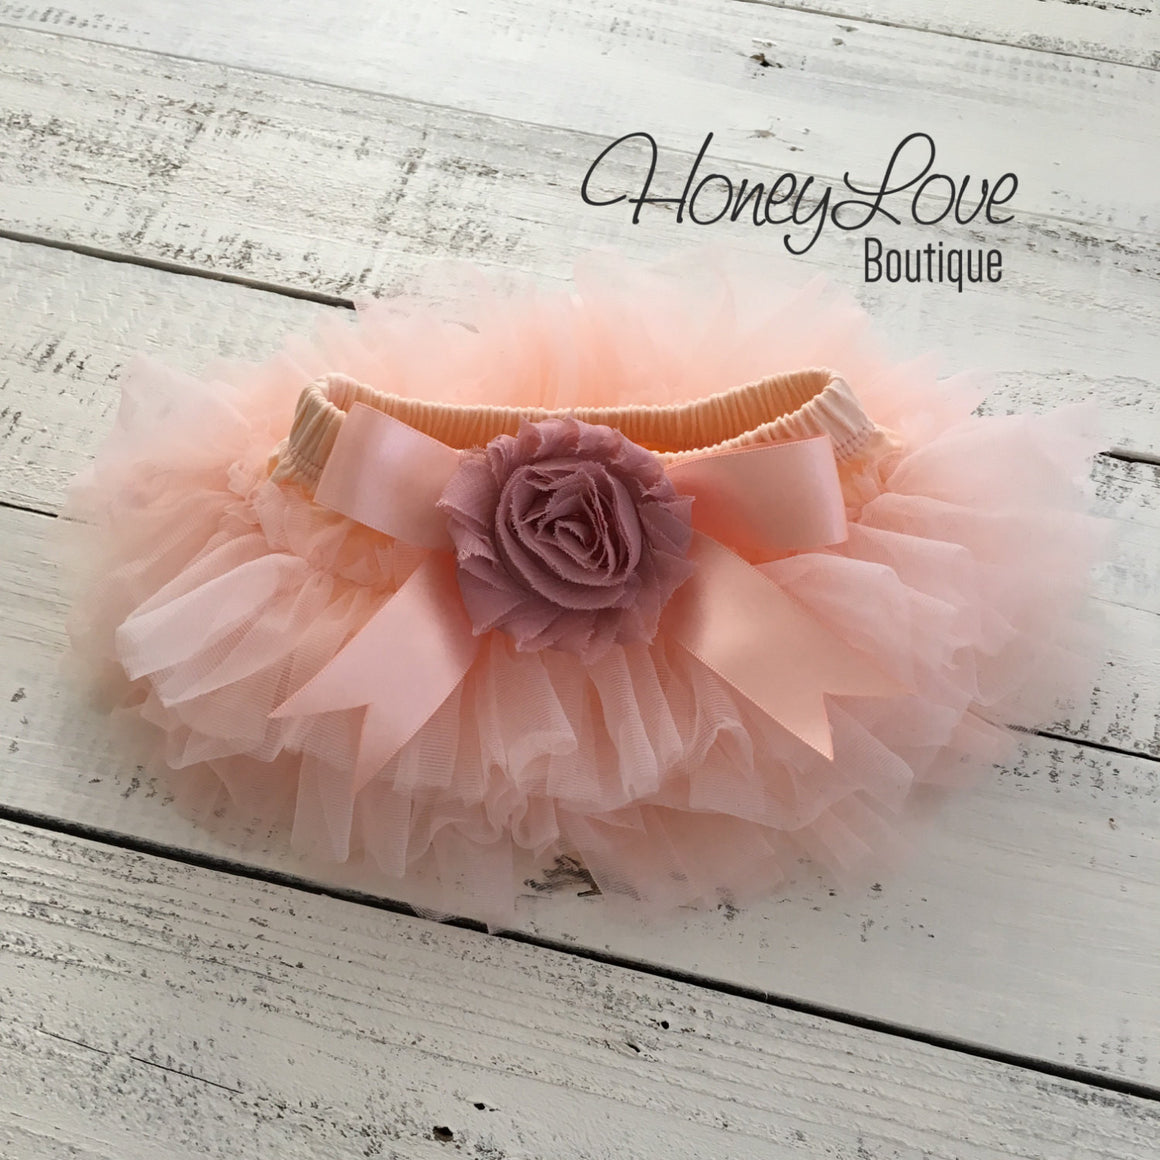 PERSONALIZED Name Outfit - Gold glitter and Peach/Vintage Pink - embellished tutu skirt bloomers - HoneyLoveBoutique